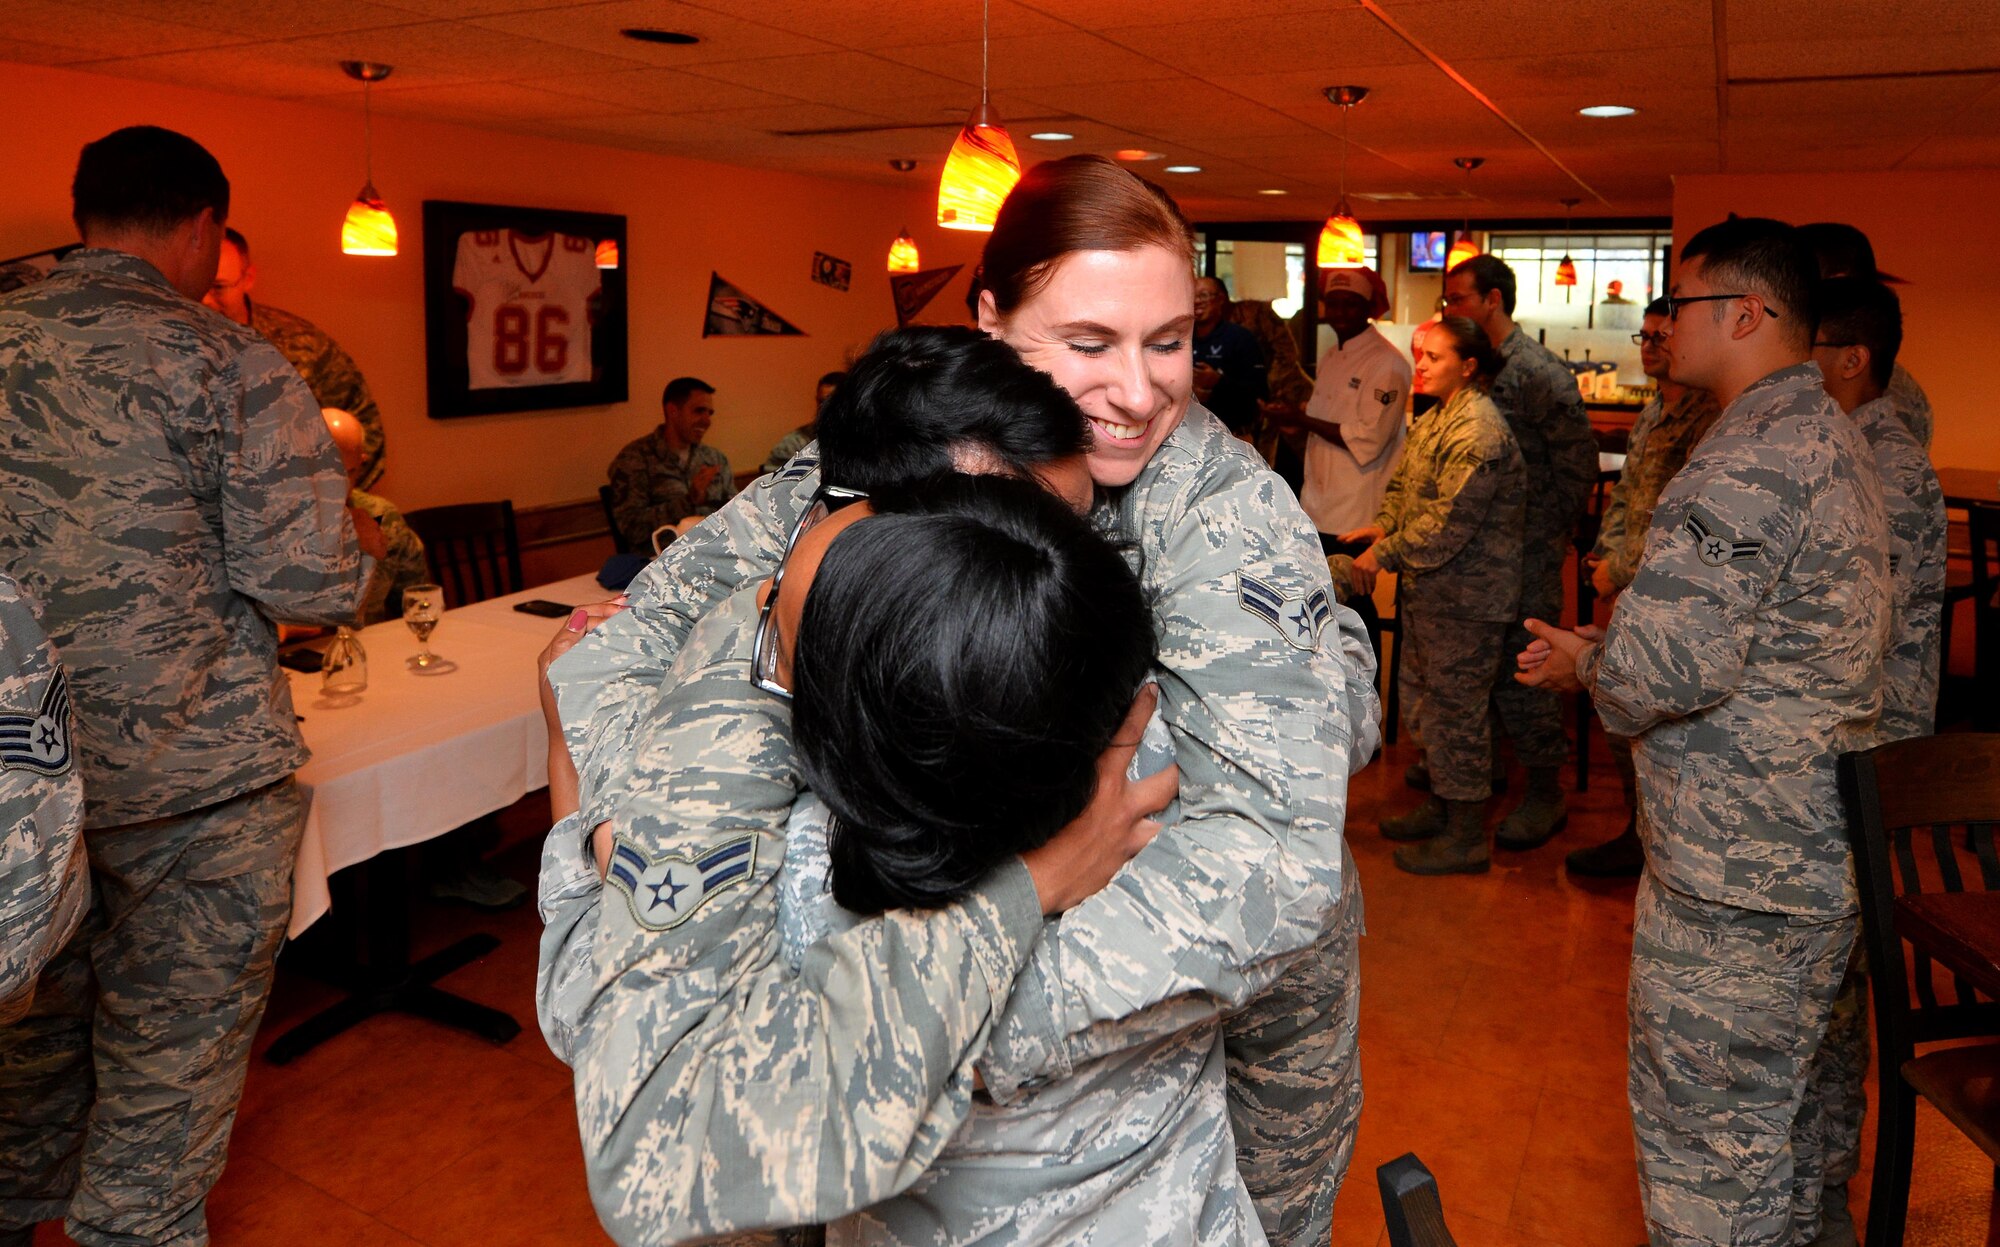 The Iron Chef team representing the Campisi Alert Dining Facility embrace in a team hug as they were voted the winner of the Iron Chef Grill Masters competition held held at the Ronald L. King Dining Facility on Oct. 13, Offutt Air Force Base, Neb.  Each team had to use three of the secret ingredients: kiwi, mushrooms and pineapple.  (U.S. Air Force photo by Josh Plueger)